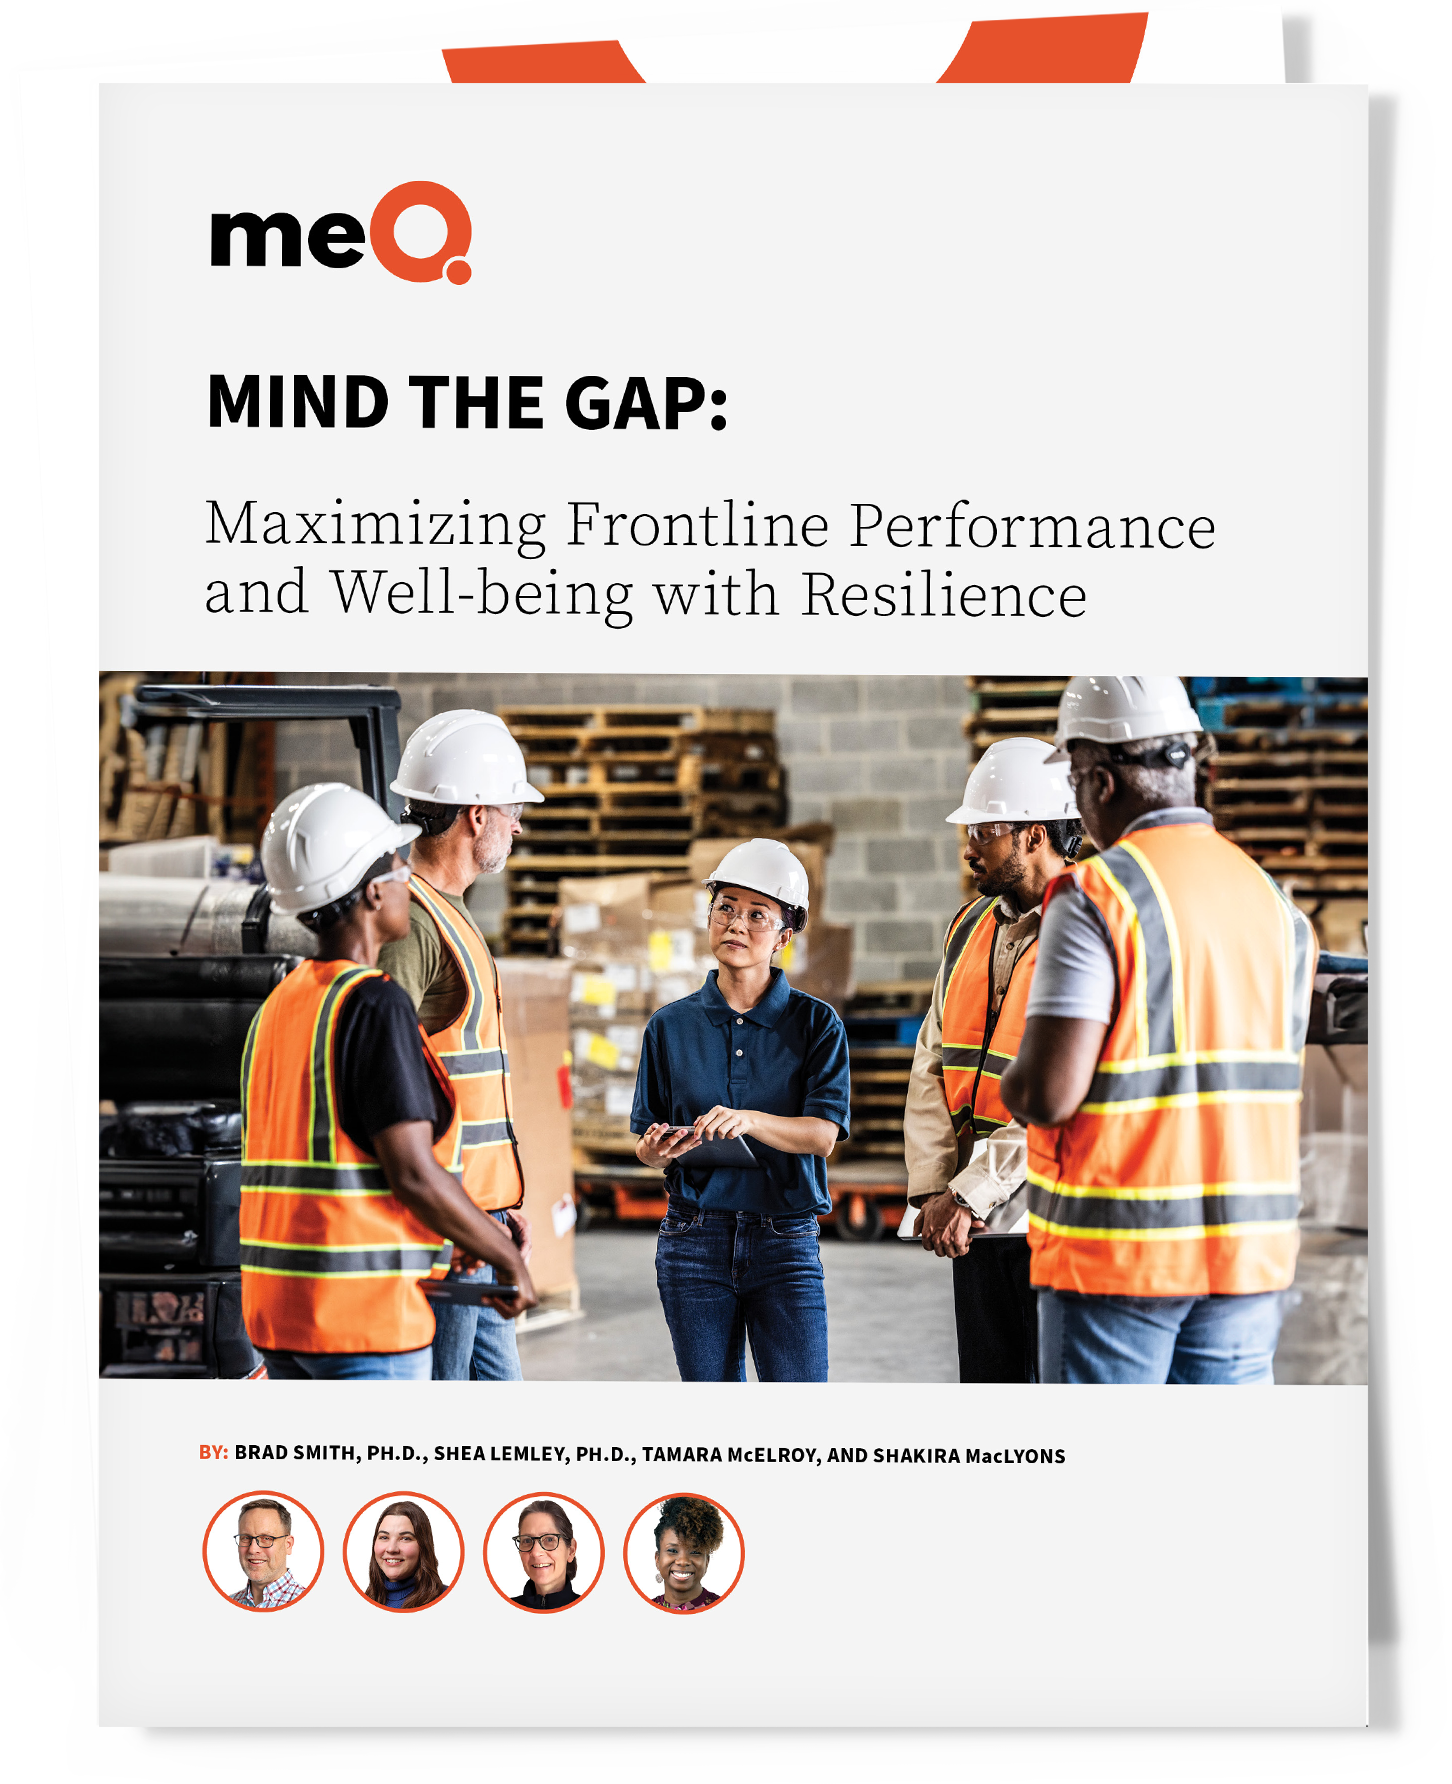 Minding the Gap: Maximizing Frontline Performance and Well-being with Resilience